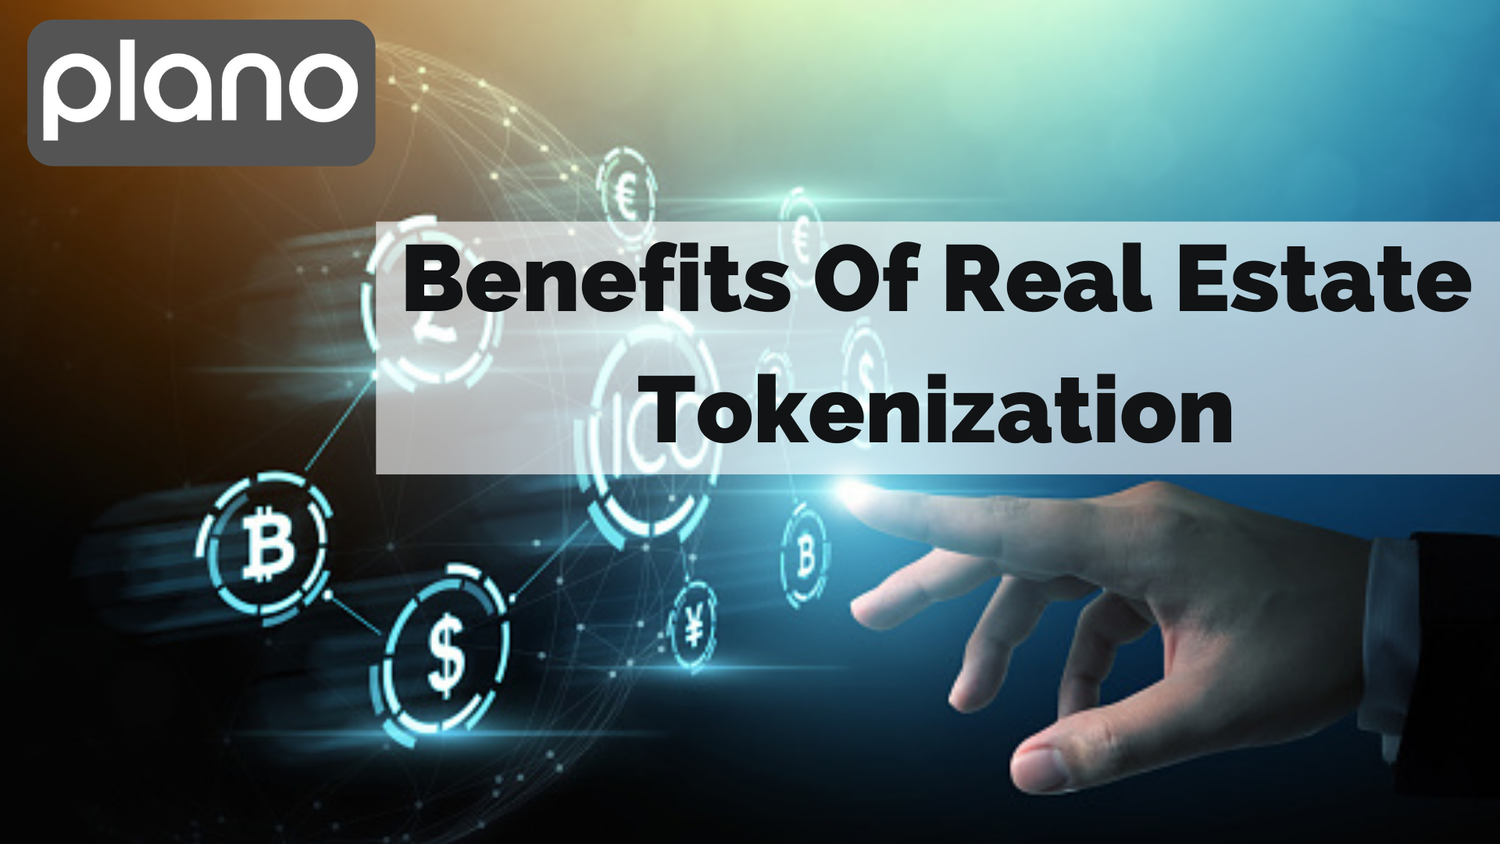 Plano is the best among the other real estate tokenization companies!